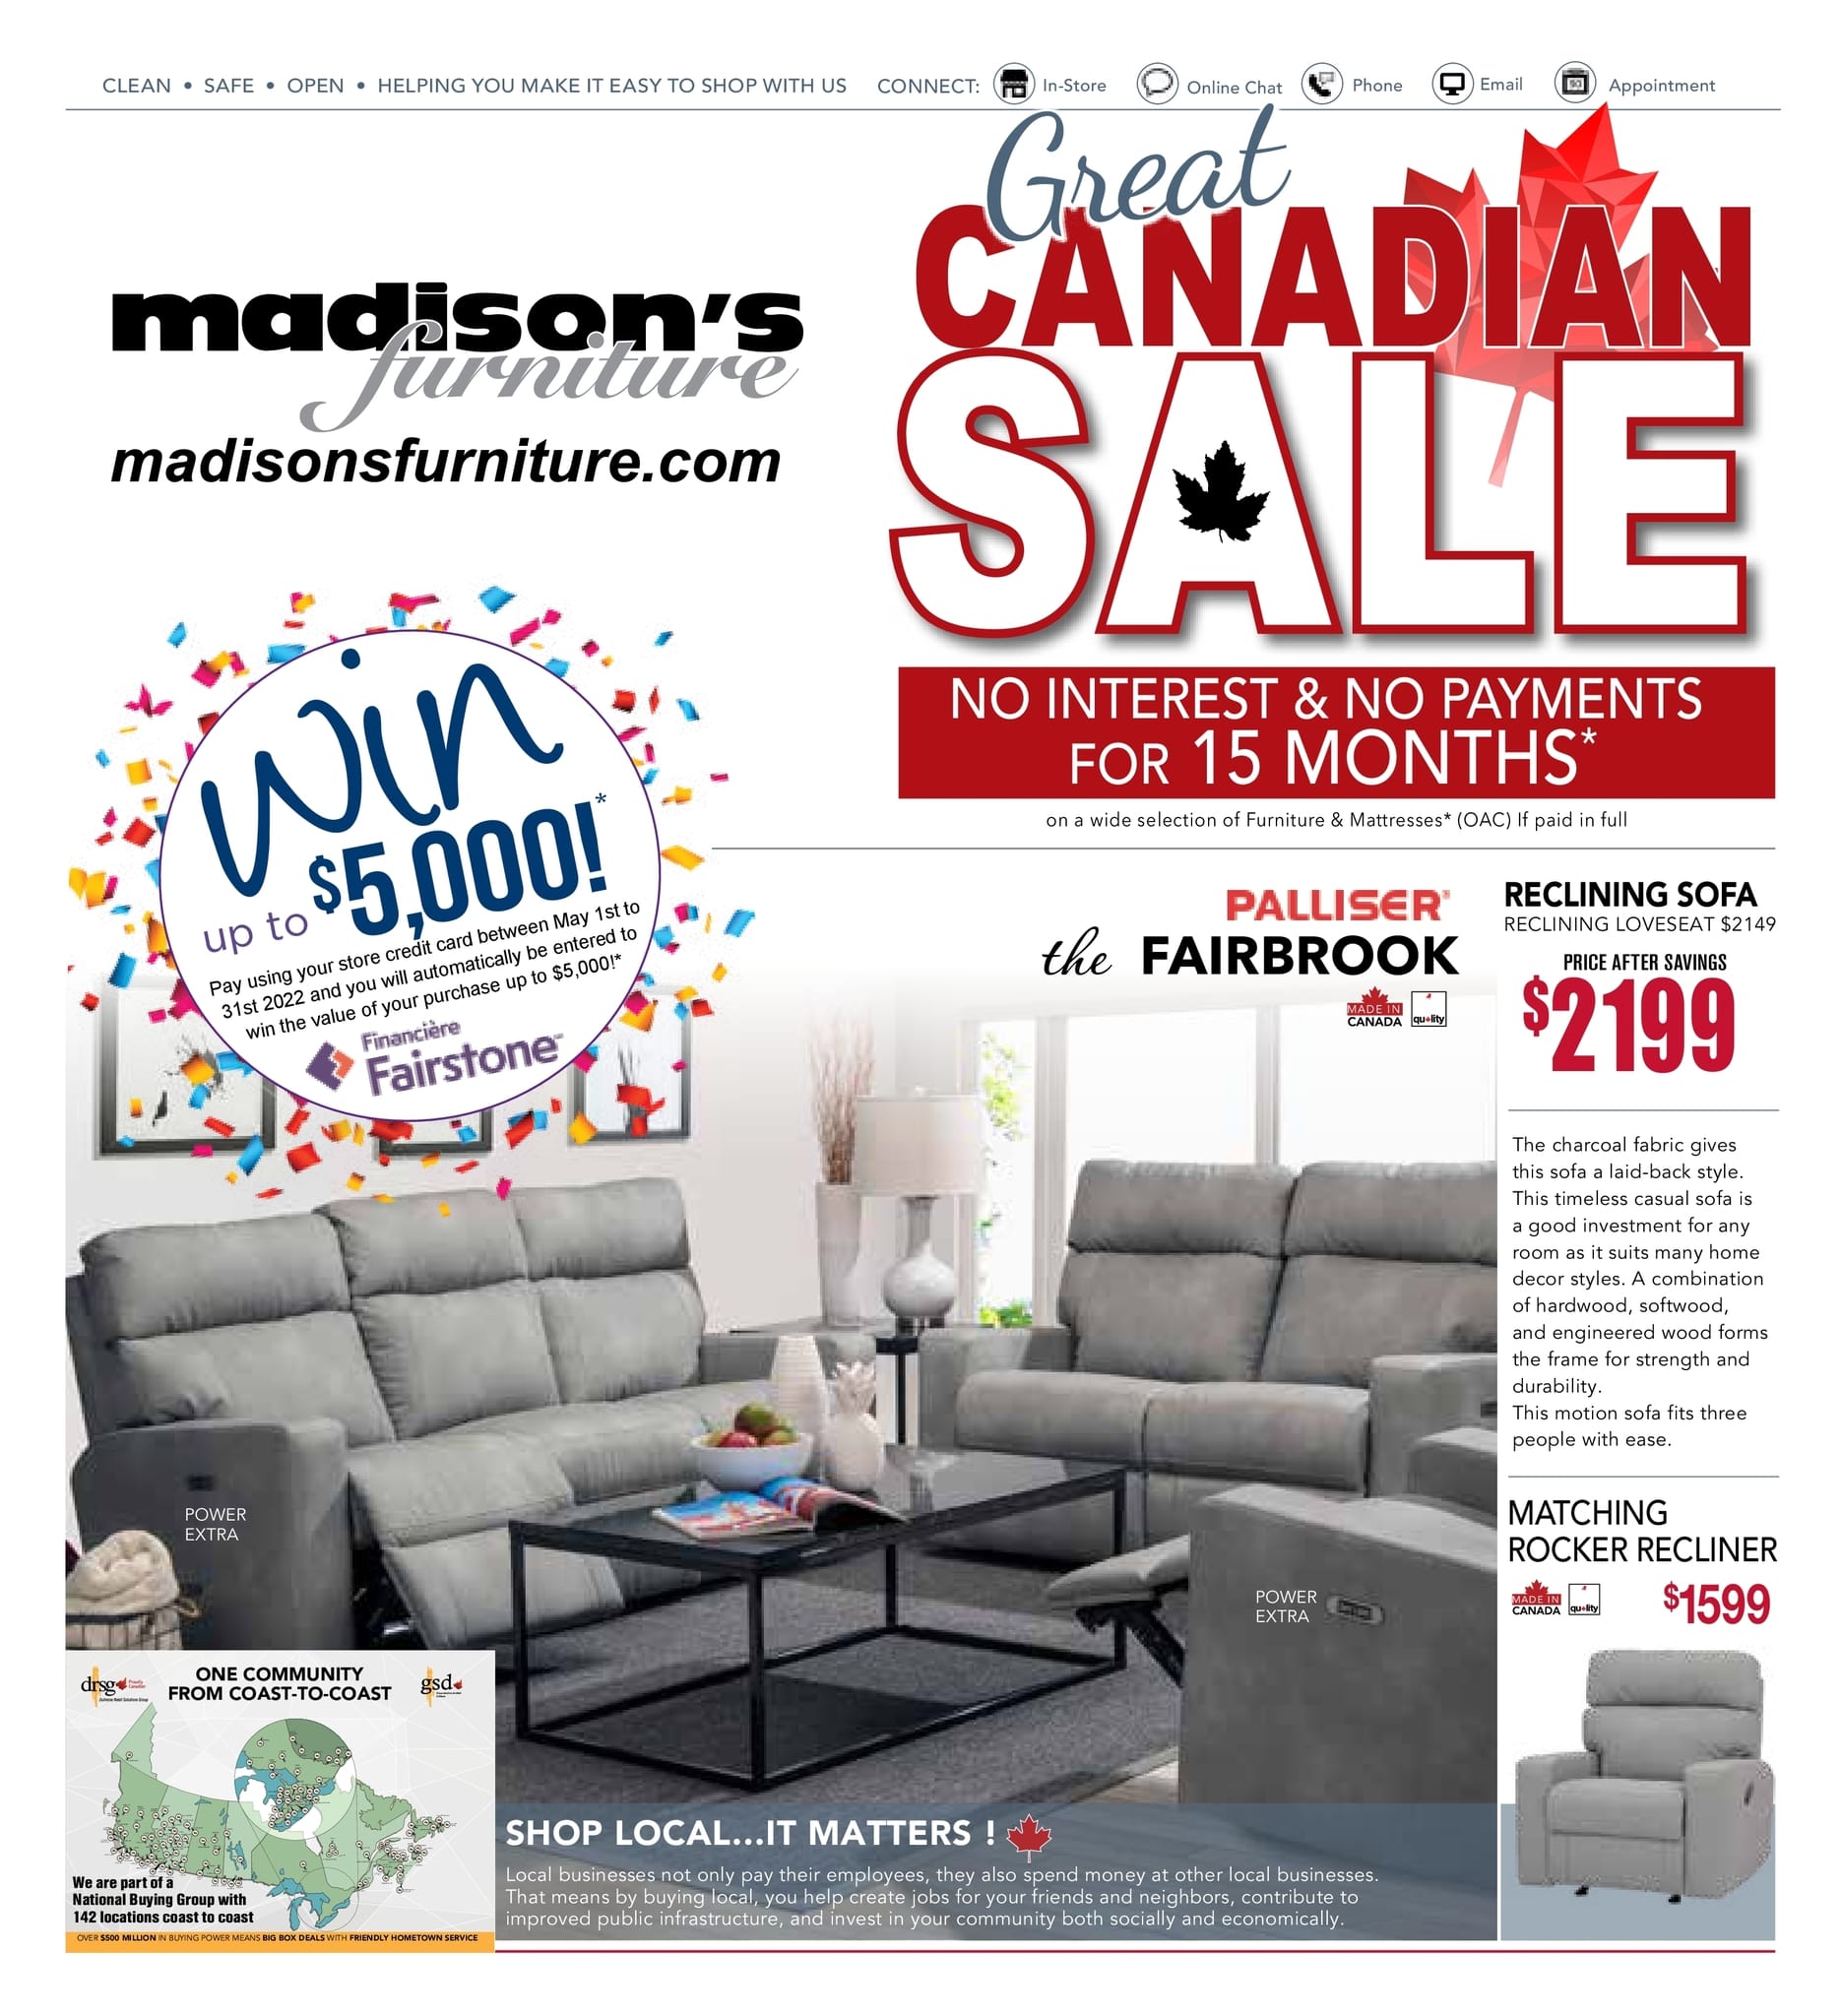 Madison's Furniture - Great Canadian Sale